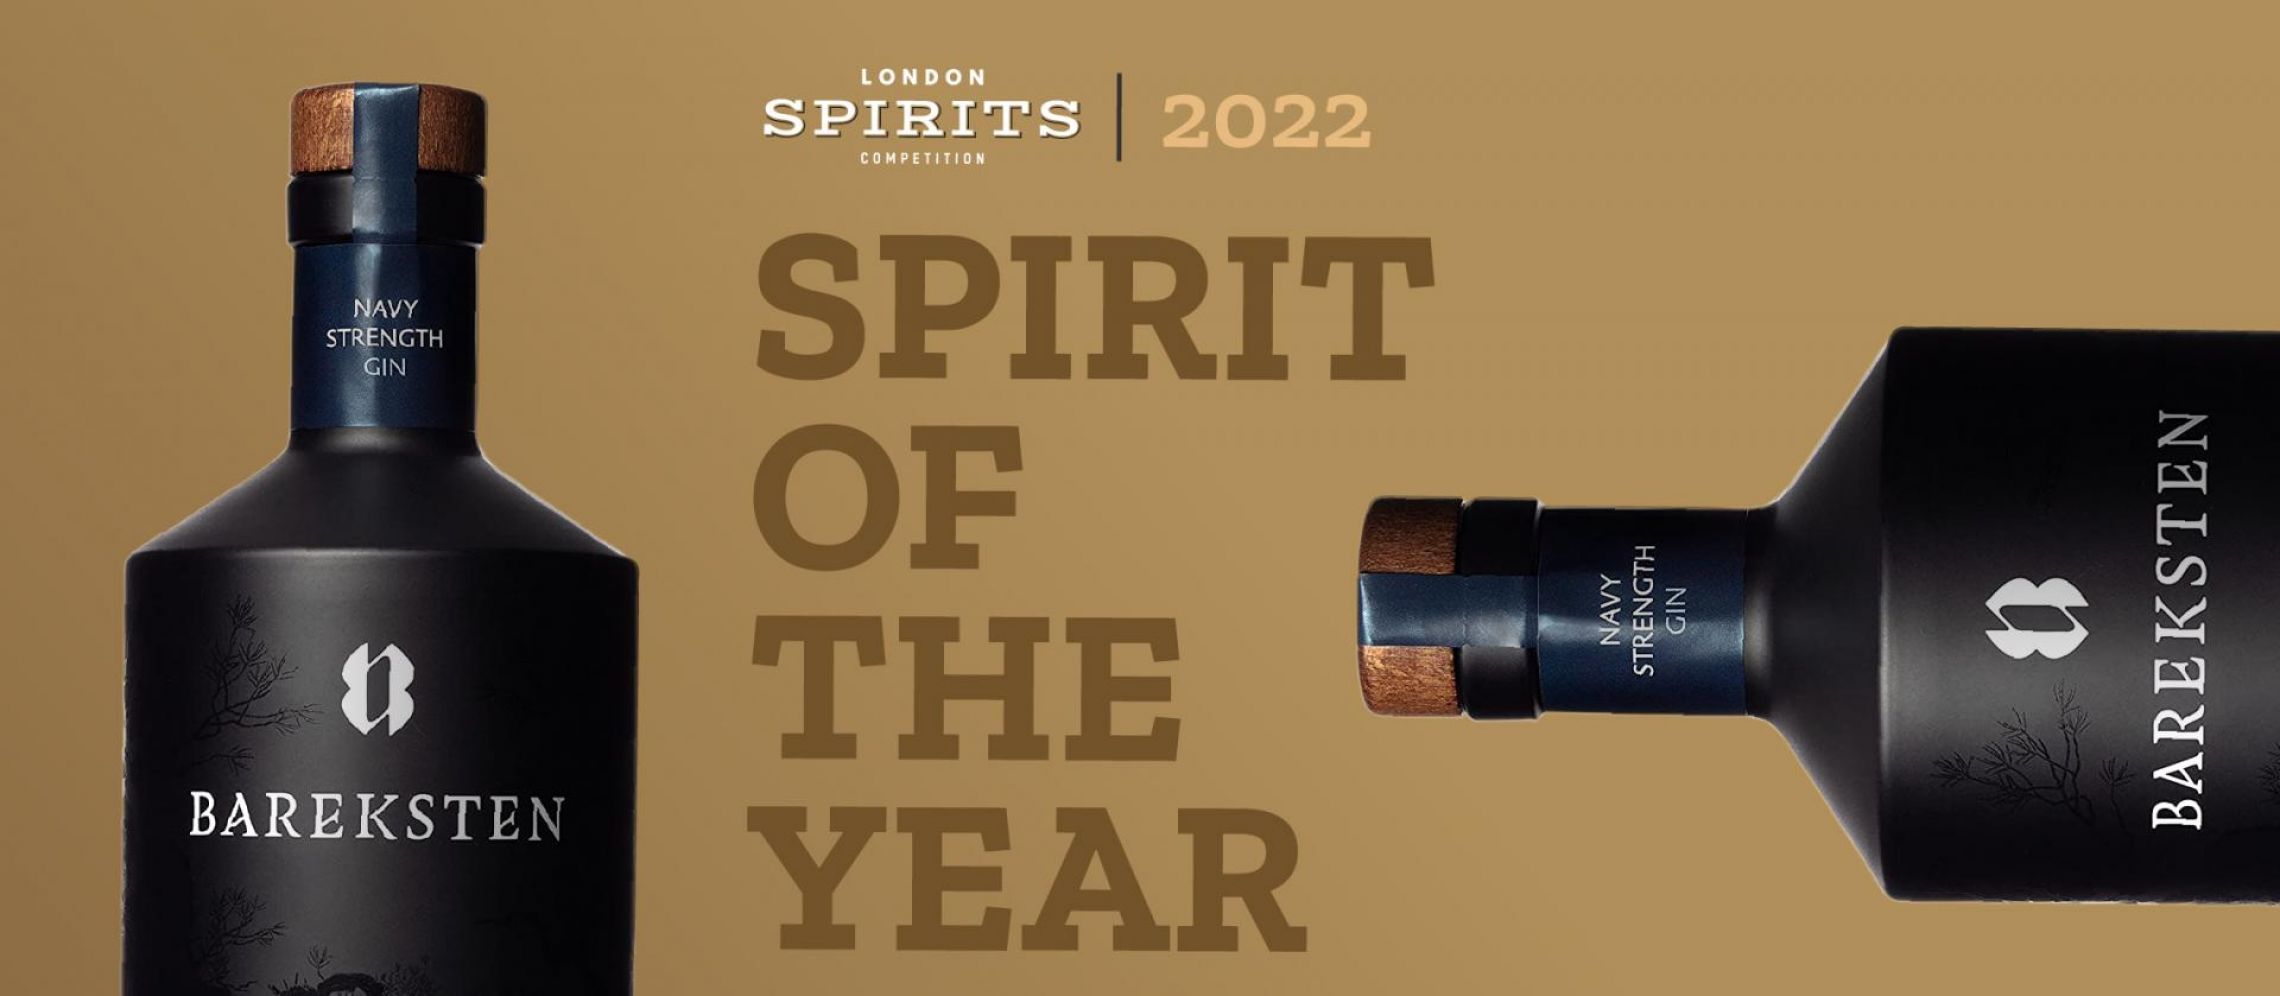 Photo for: Celebrate Gin Day with the GIN OF THE YEAR 2022 : Bareksten Navy Strength